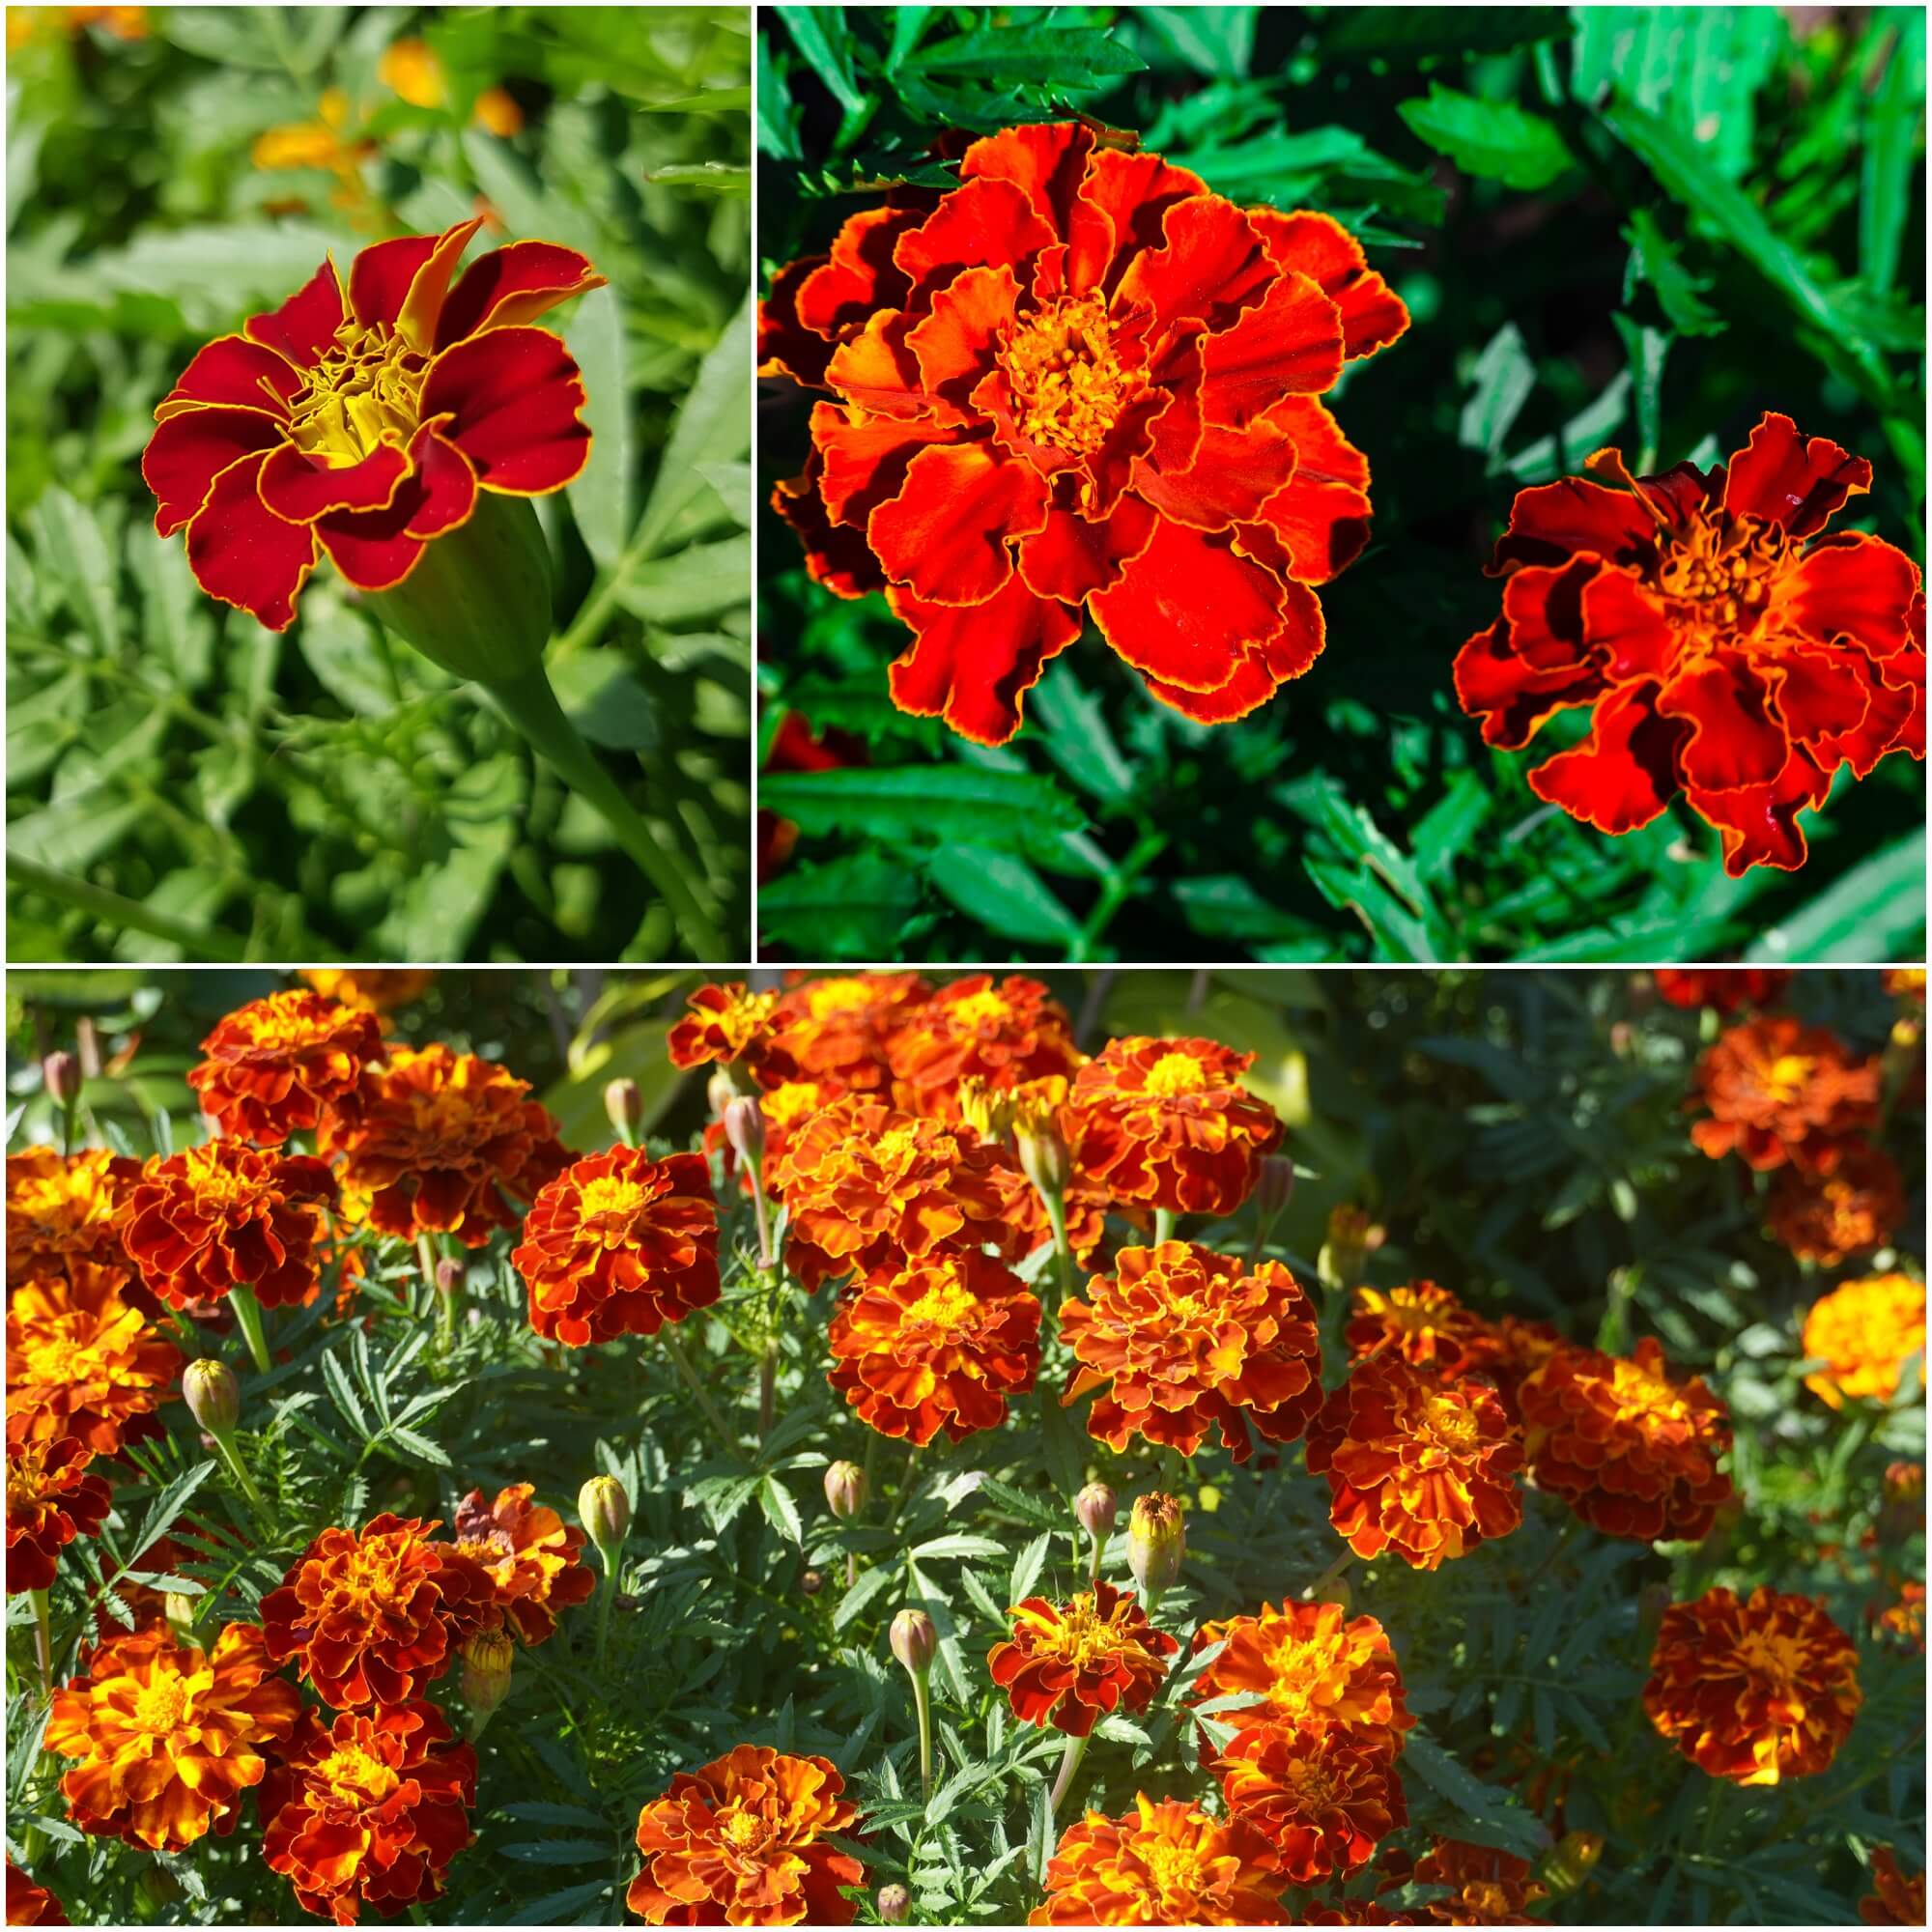 Marigold - Dwarf Double Red Cherry seeds